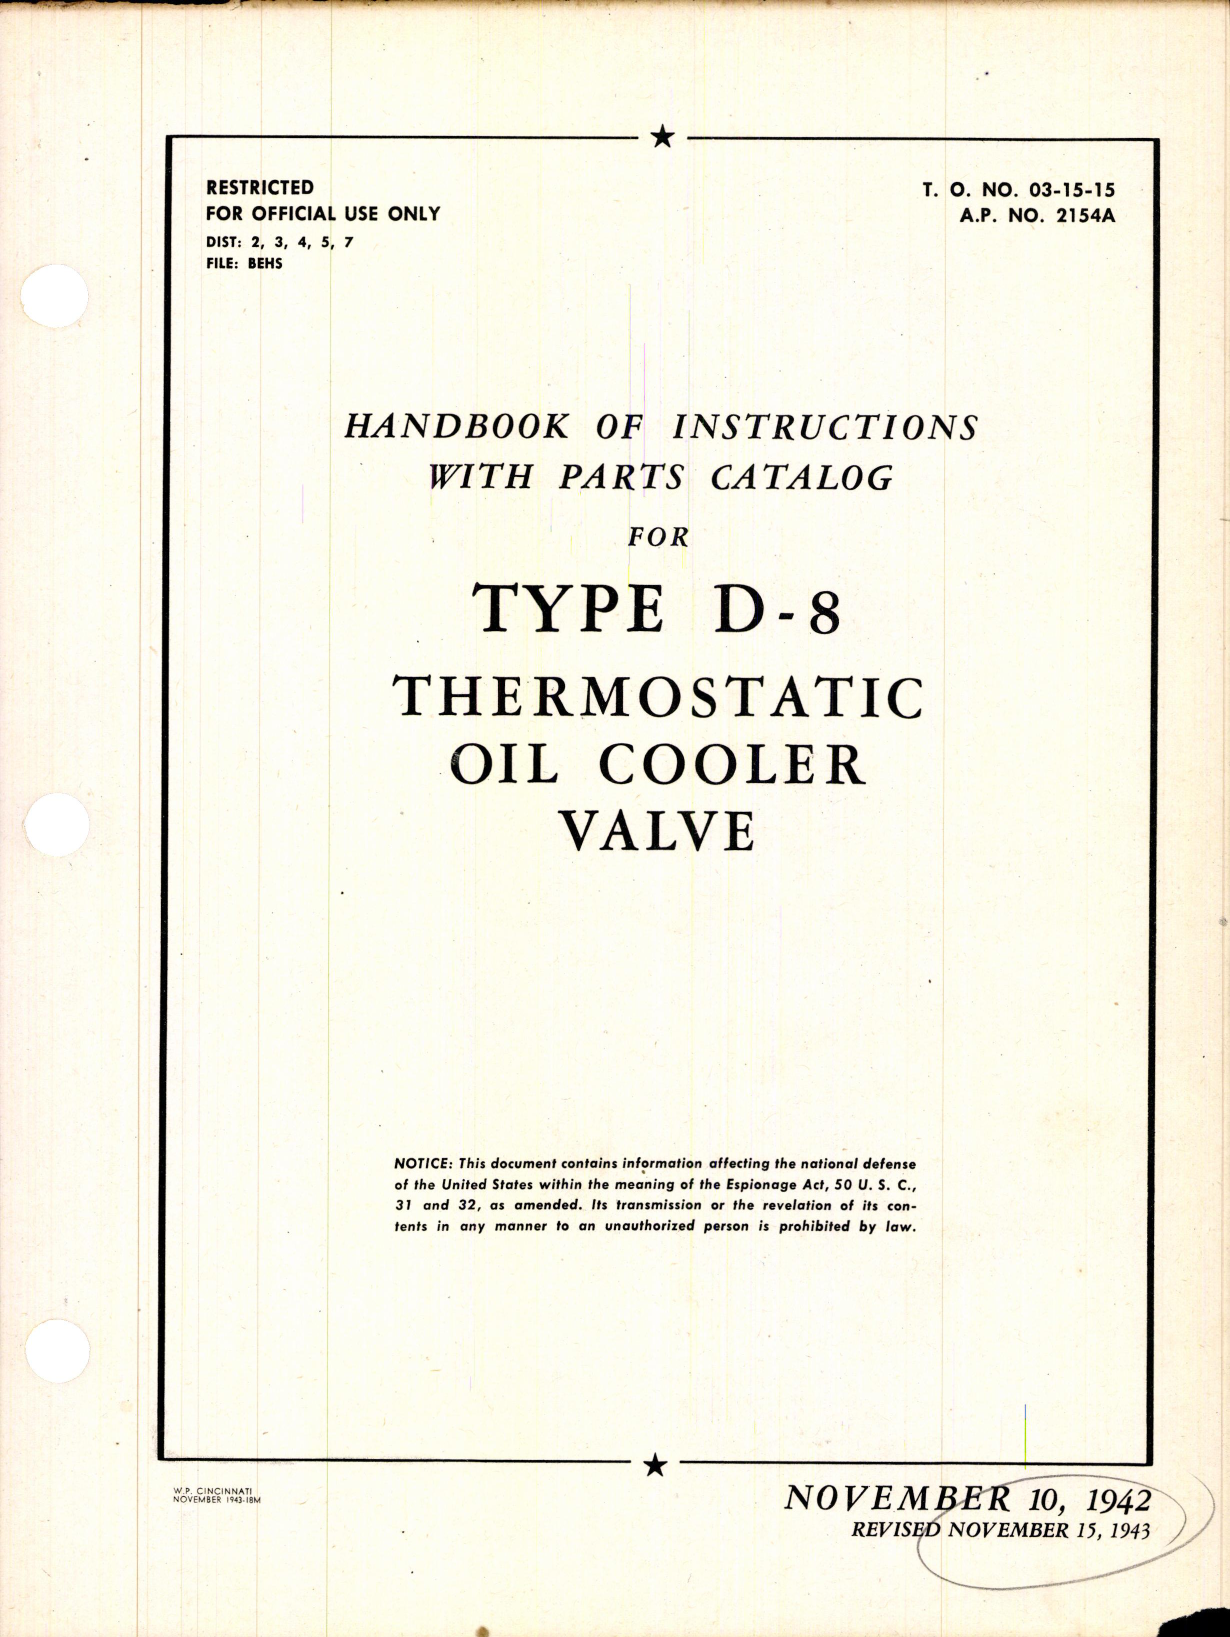 Sample page 1 from AirCorps Library document: Instructions w PC for Type D-8 Thermostatic Oil Cooler Valve